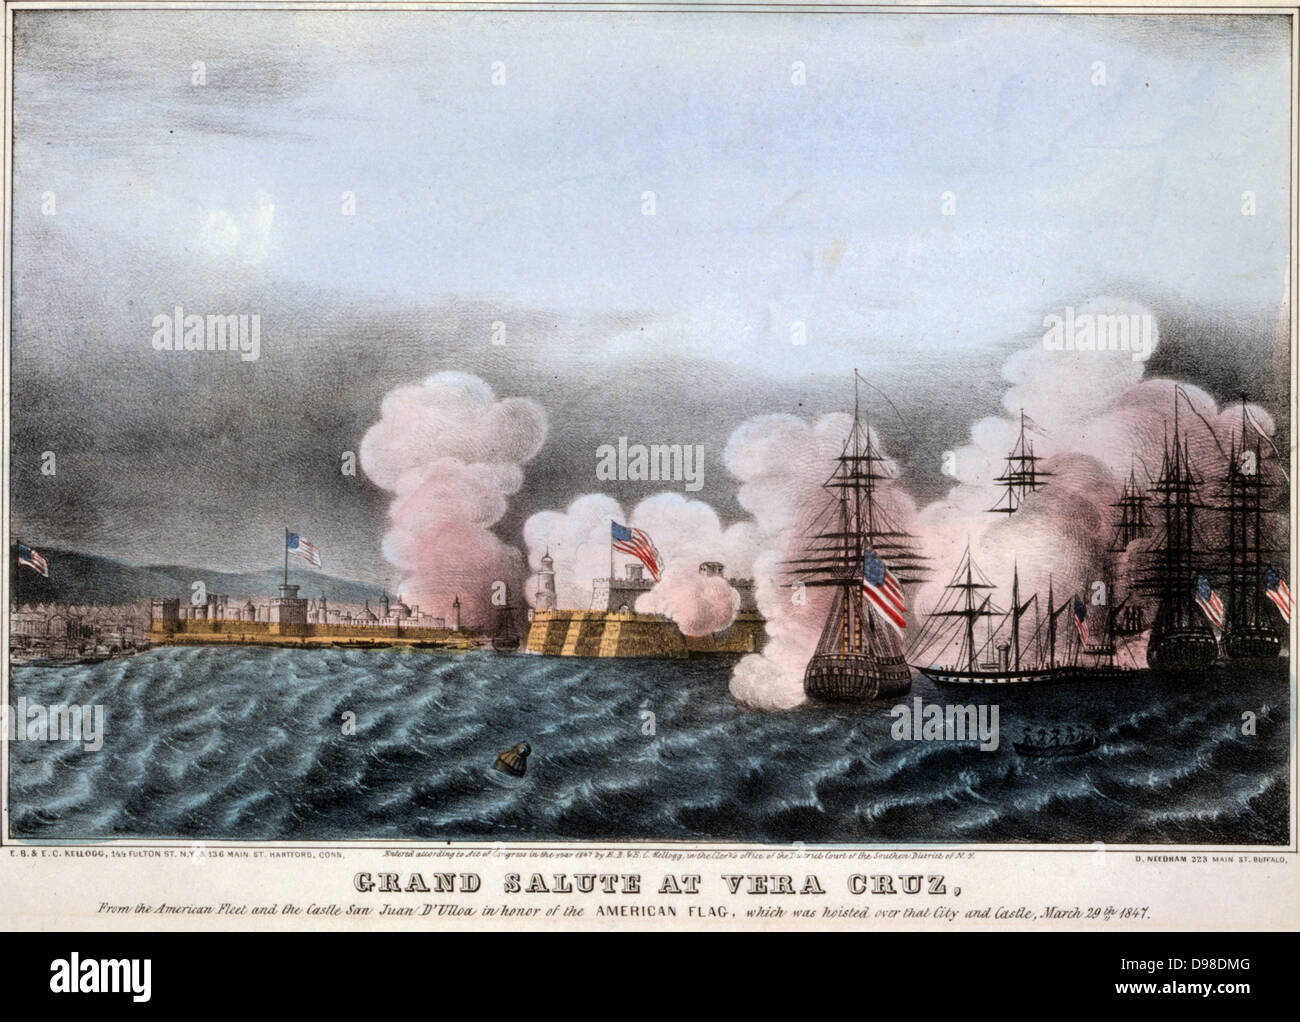 Mexican-American War 1846-1848: Battle of Vera Cruz, 20 day siege of the city 9-29 March 1847. American fleet saluting the raising of Stars and Stripes on Castle of San Juan d'Ulloa . This was the first large-scale amphibious assault by the United States forces. Stock Photo